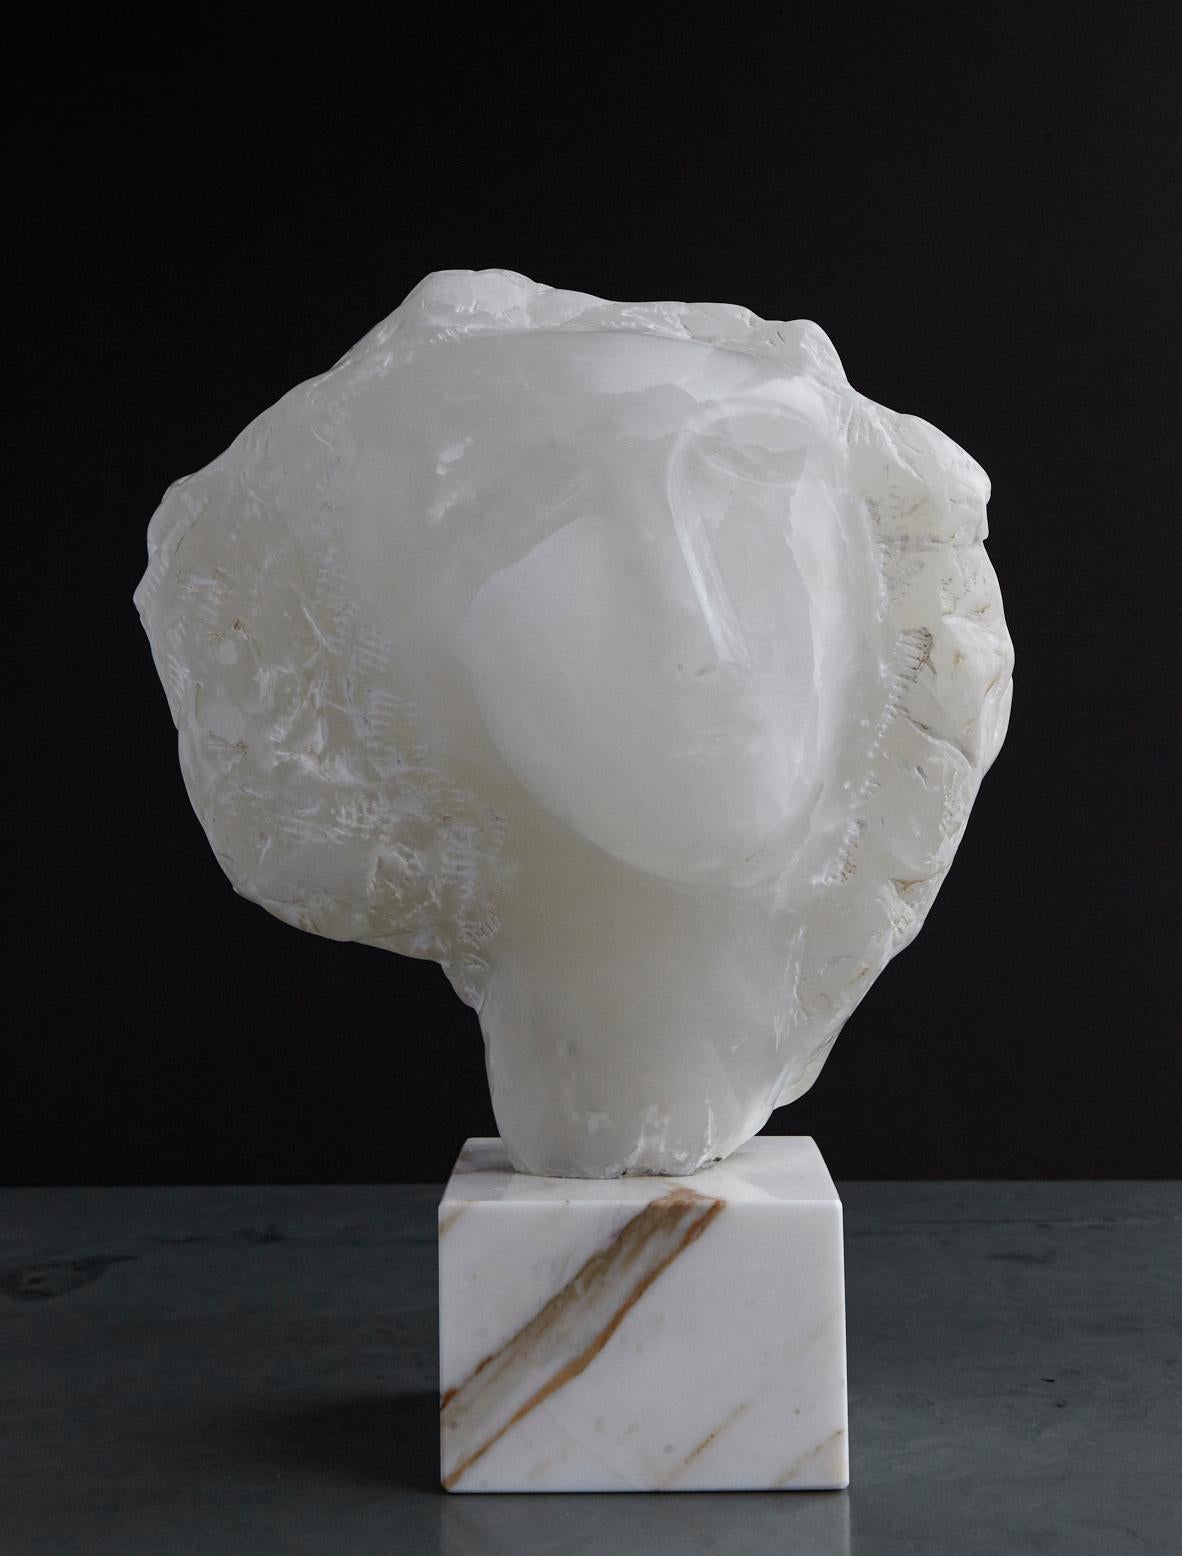 Beautiful modern white onyx sculpture of a woman's face mounted on a square marble base.
Depending of the placement of the piece, the sculpture seems to glow when it is backlit through a window light, please see photos.
Measurements: Sculpture: H